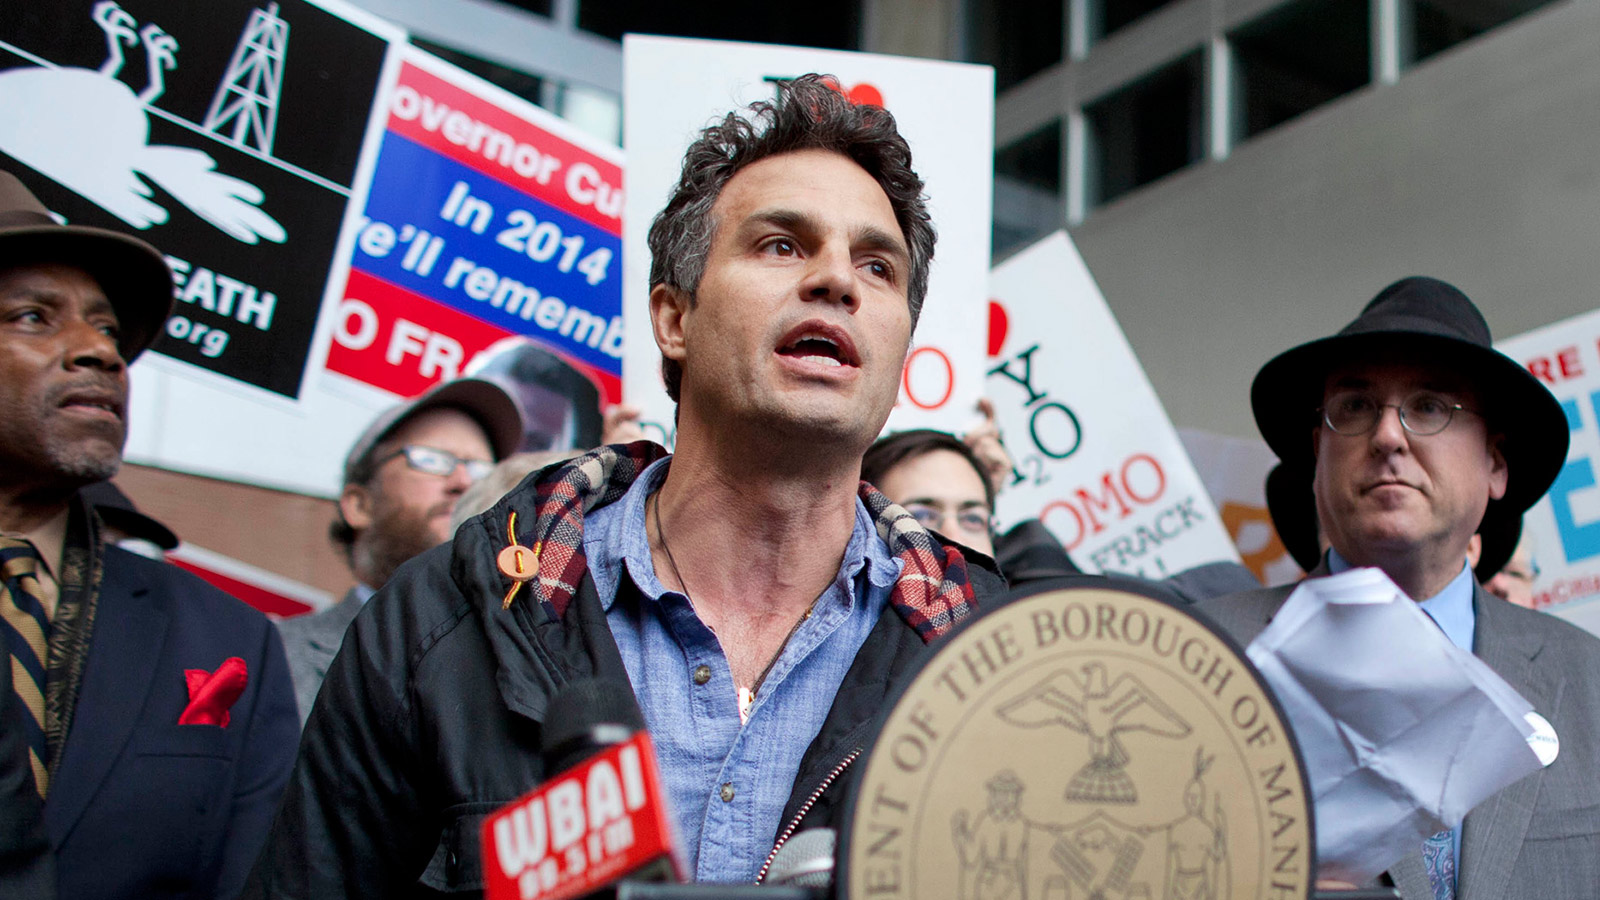 Actor Mark Ruffalo speaks during a protest against hydraulic fracturing outside the Tribeca Performing Arts Center, Borough of Manhattan Community College in New York November 30, 2011.